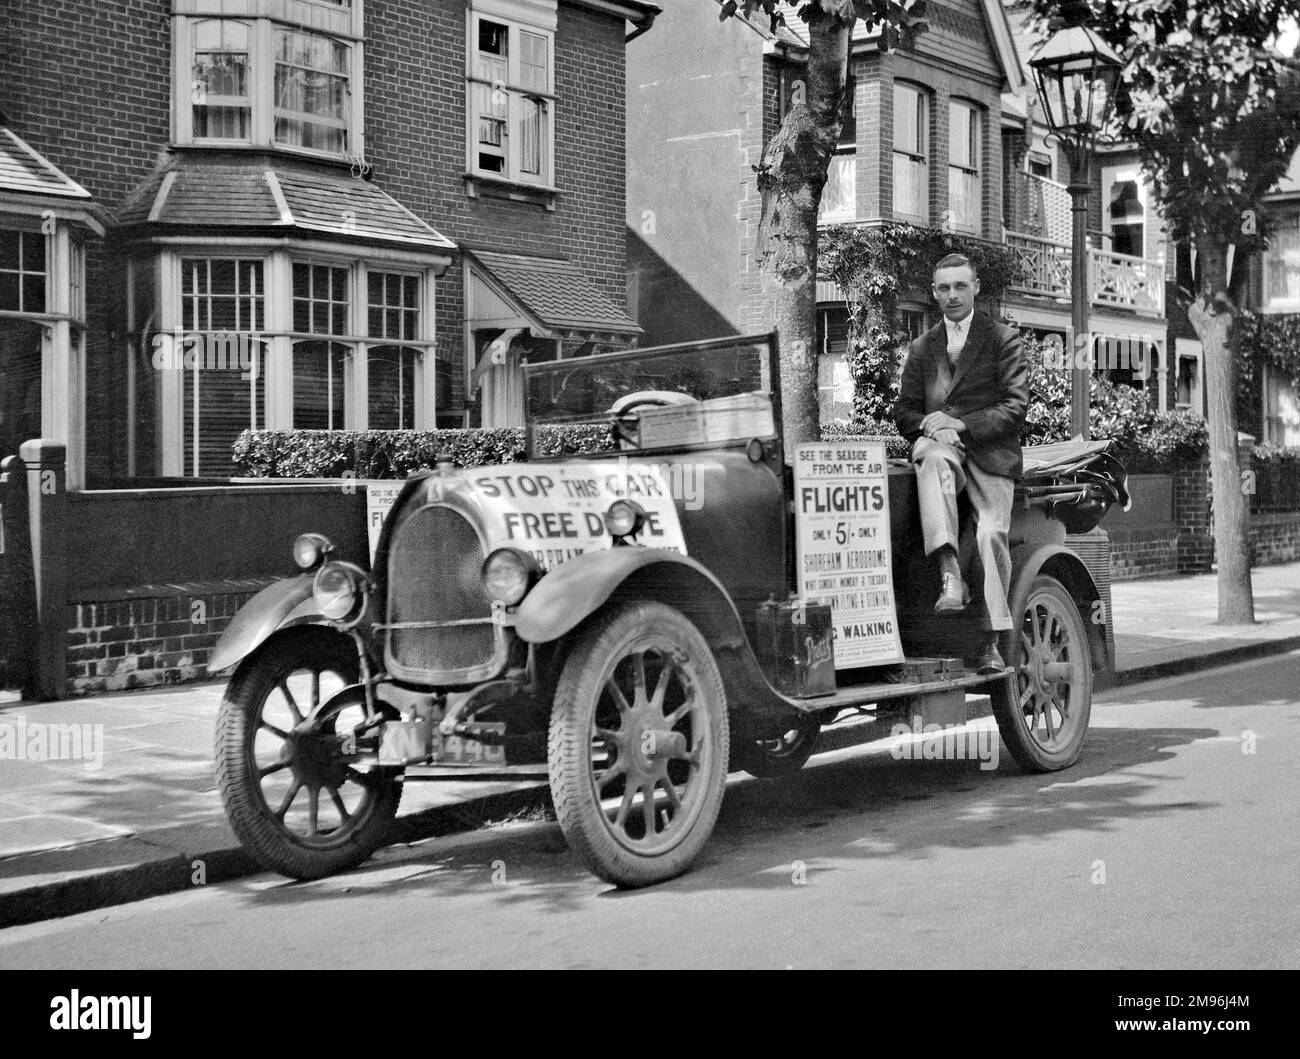 Advertising material displayed on a car, with a man sitting alongside.  One poster reads: Stop this car for a free drive, and the other reads: See the seaside from the air, flights only five shillings, Shoreham Aerodrome, Whit Sunday, Monday and Tuesday. Stock Photo